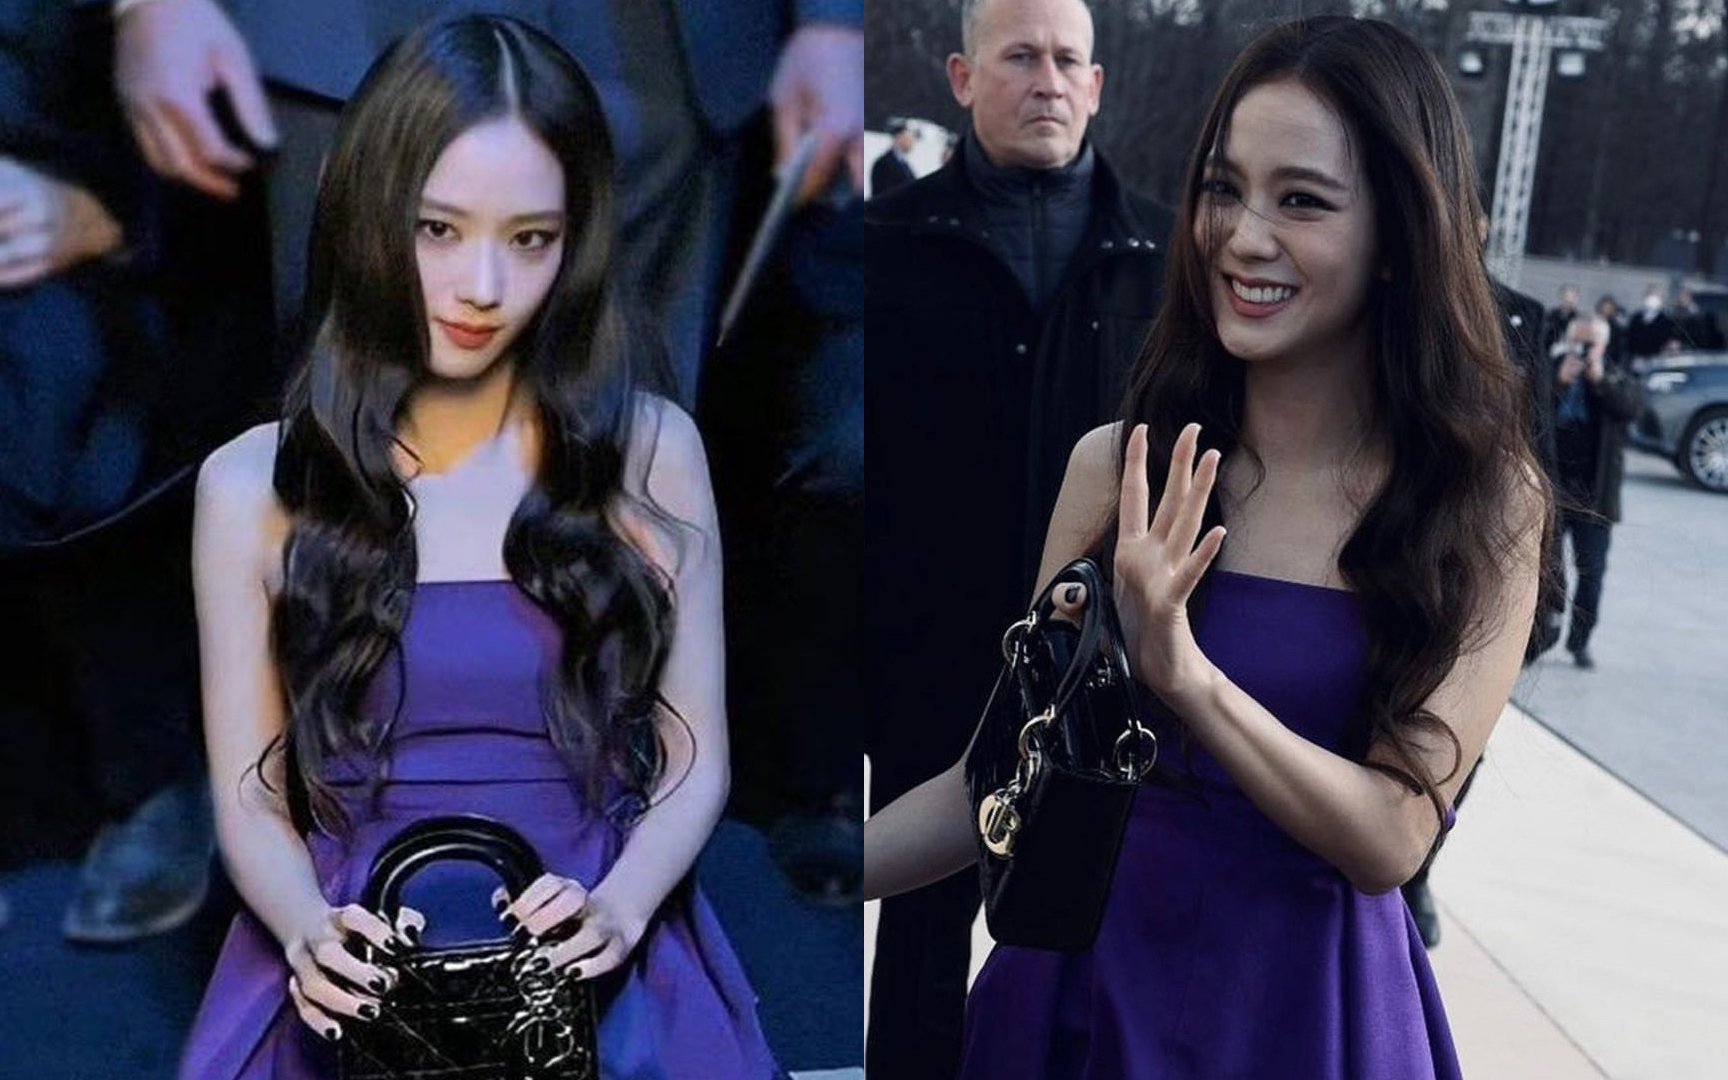 Dior  JISOO Dior fashion and beauty global ambassador set the cameras  flashing when she arrived at the Fall 2022 by Maria Grazia Chiuri show in  Seoul earlier Discover the justunveiled new